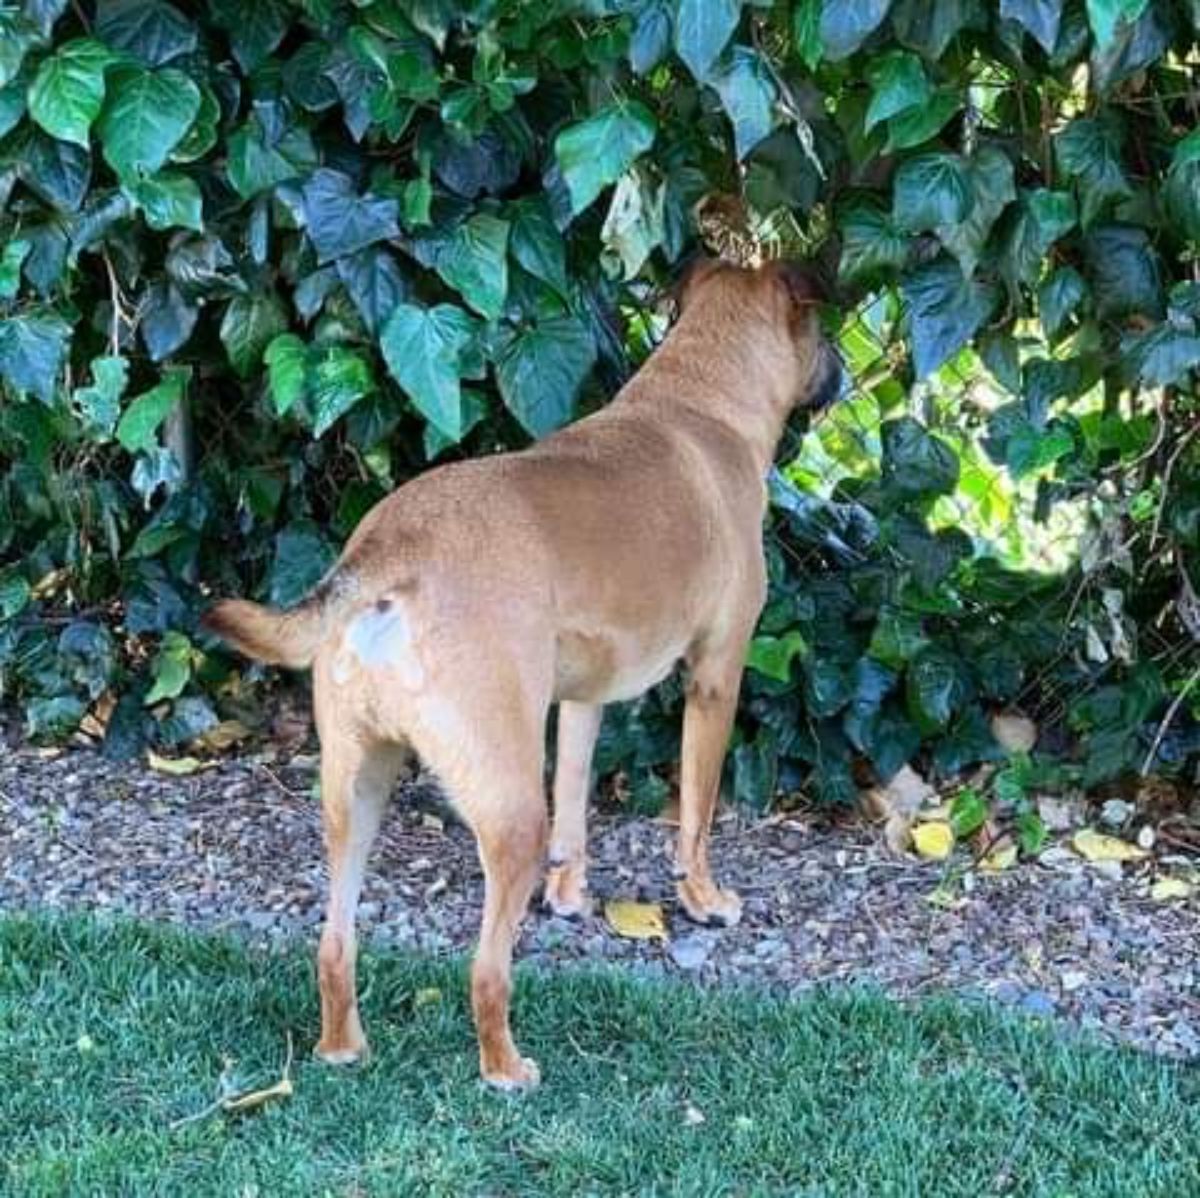 brown dog standing in a garden and peeking through a fence covered in vines and leaves